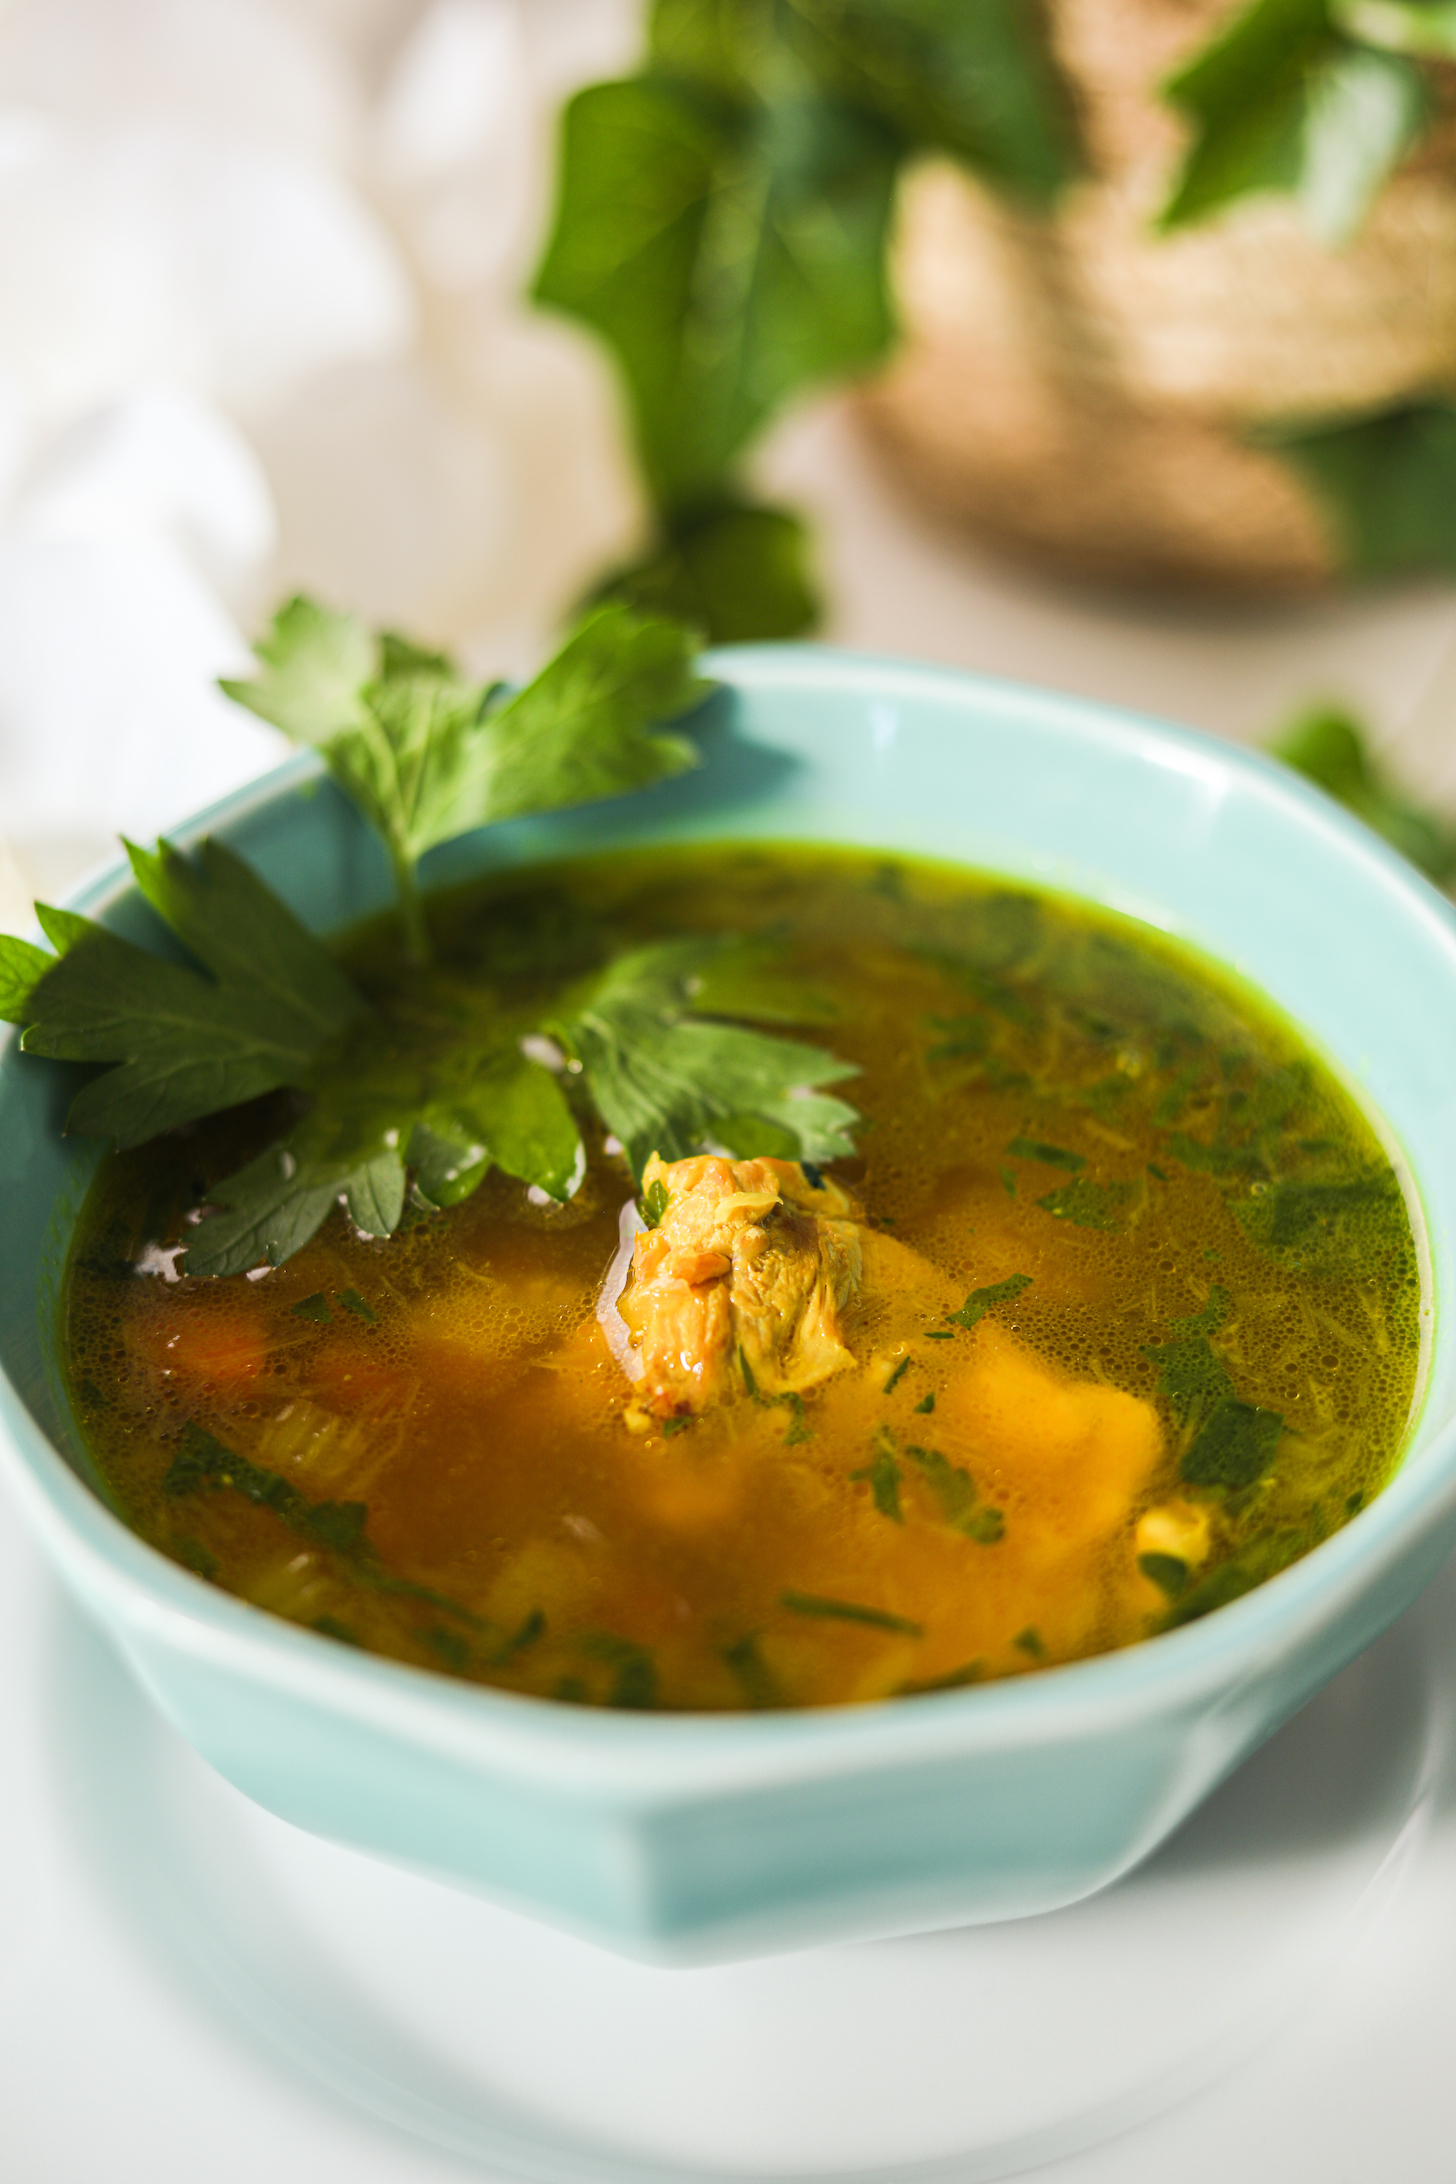 Perspective shot of a bowl of brown soup topped with parsley leaf with a plant in the background.